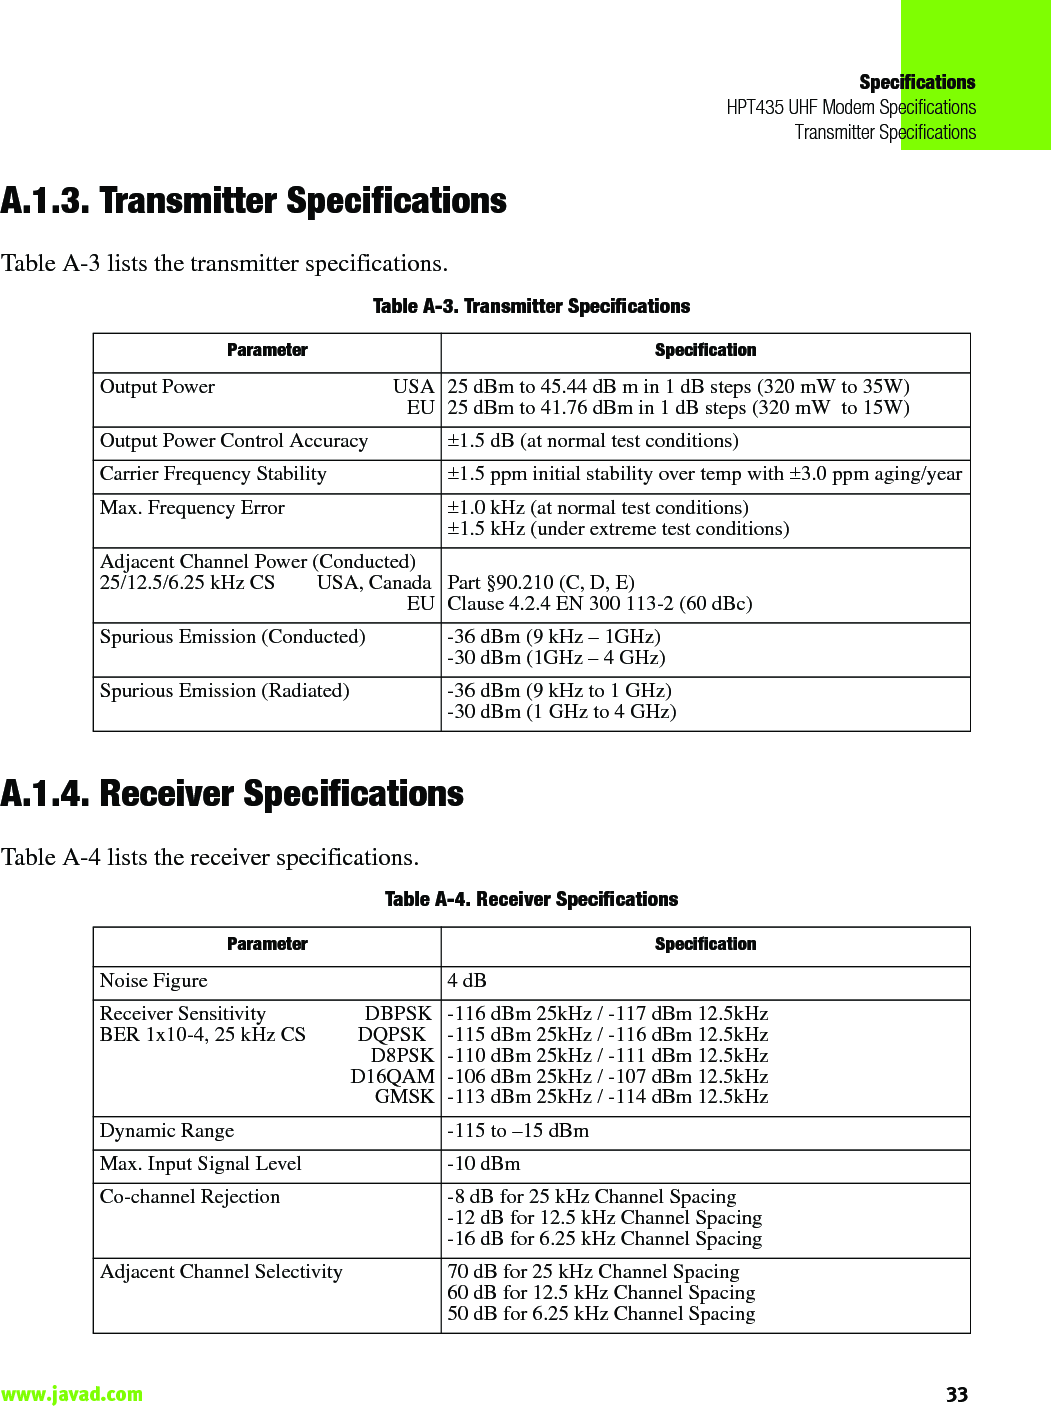 SpecificationsHPT435 UHF Modem SpecificationsTransmitter Specifications33www.javad.com                                                                                                                                                    A.1.3. Transmitter SpecificationsTable A-3 lists the transmitter specifications.Table A-3. Transmitter SpecificationsA.1.4. Receiver SpecificationsTable A-4 lists the receiver specifications.Table A-4. Receiver SpecificationsParameter SpecificationOutput Power                                     USA                                                                EU 25 dBm to 45.44 dB m in 1 dB steps (320 mW to 35W)25 dBm to 41.76 dBm in 1 dB steps (320 mW  to 15W)Output Power Control Accuracy ±1.5 dB (at normal test conditions)Carrier Frequency Stability ±1.5 ppm initial stability over temp with ±3.0 ppm aging/yearMax. Frequency Error ±1.0 kHz (at normal test conditions)±1.5 kHz (under extreme test conditions)Adjacent Channel Power (Conducted)25/12.5/6.25 kHz CS        USA, Canada                                                                 EU Part §90.210 (C, D, E)Clause 4.2.4 EN 300 113-2 (60 dBc)Spurious Emission (Conducted) -36 dBm (9 kHz – 1GHz) -30 dBm (1GHz – 4 GHz)Spurious Emission (Radiated) -36 dBm (9 kHz to 1 GHz)-30 dBm (1 GHz to 4 GHz)Parameter SpecificationNoise Figure 4 dBReceiver Sensitivity                   DBPSKBER 1x10-4, 25 kHz CS          DQPSK                                               D8PSKD16QAMGMSK-116 dBm 25kHz / -117 dBm 12.5kHz-115 dBm 25kHz / -116 dBm 12.5kHz-110 dBm 25kHz / -111 dBm 12.5kHz-106 dBm 25kHz / -107 dBm 12.5kHz-113 dBm 25kHz / -114 dBm 12.5kHzDynamic Range -115 to –15 dBmMax. Input Signal Level -10 dBmCo-channel Rejection -8 dB for 25 kHz Channel Spacing-12 dB for 12.5 kHz Channel Spacing-16 dB for 6.25 kHz Channel SpacingAdjacent Channel Selectivity 70 dB for 25 kHz Channel Spacing60 dB for 12.5 kHz Channel Spacing50 dB for 6.25 kHz Channel Spacing